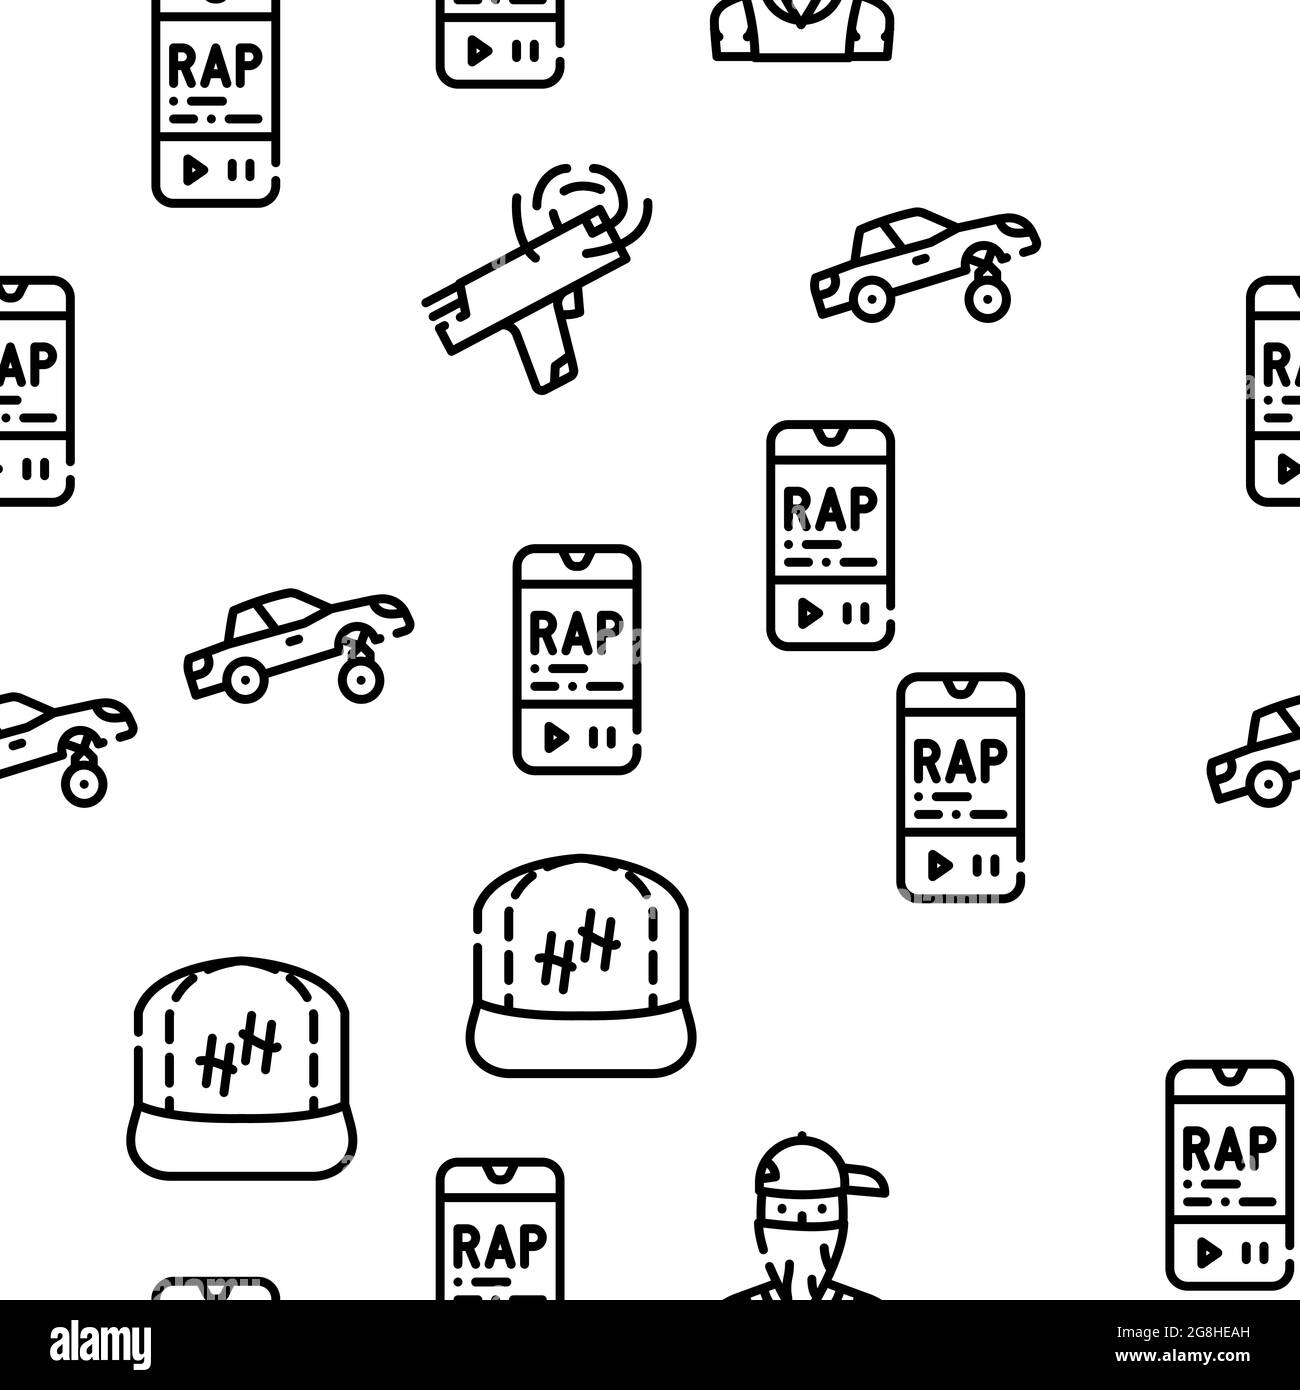 Hip Hop And Rap Music Vector Seamless Pattern Stock Vector